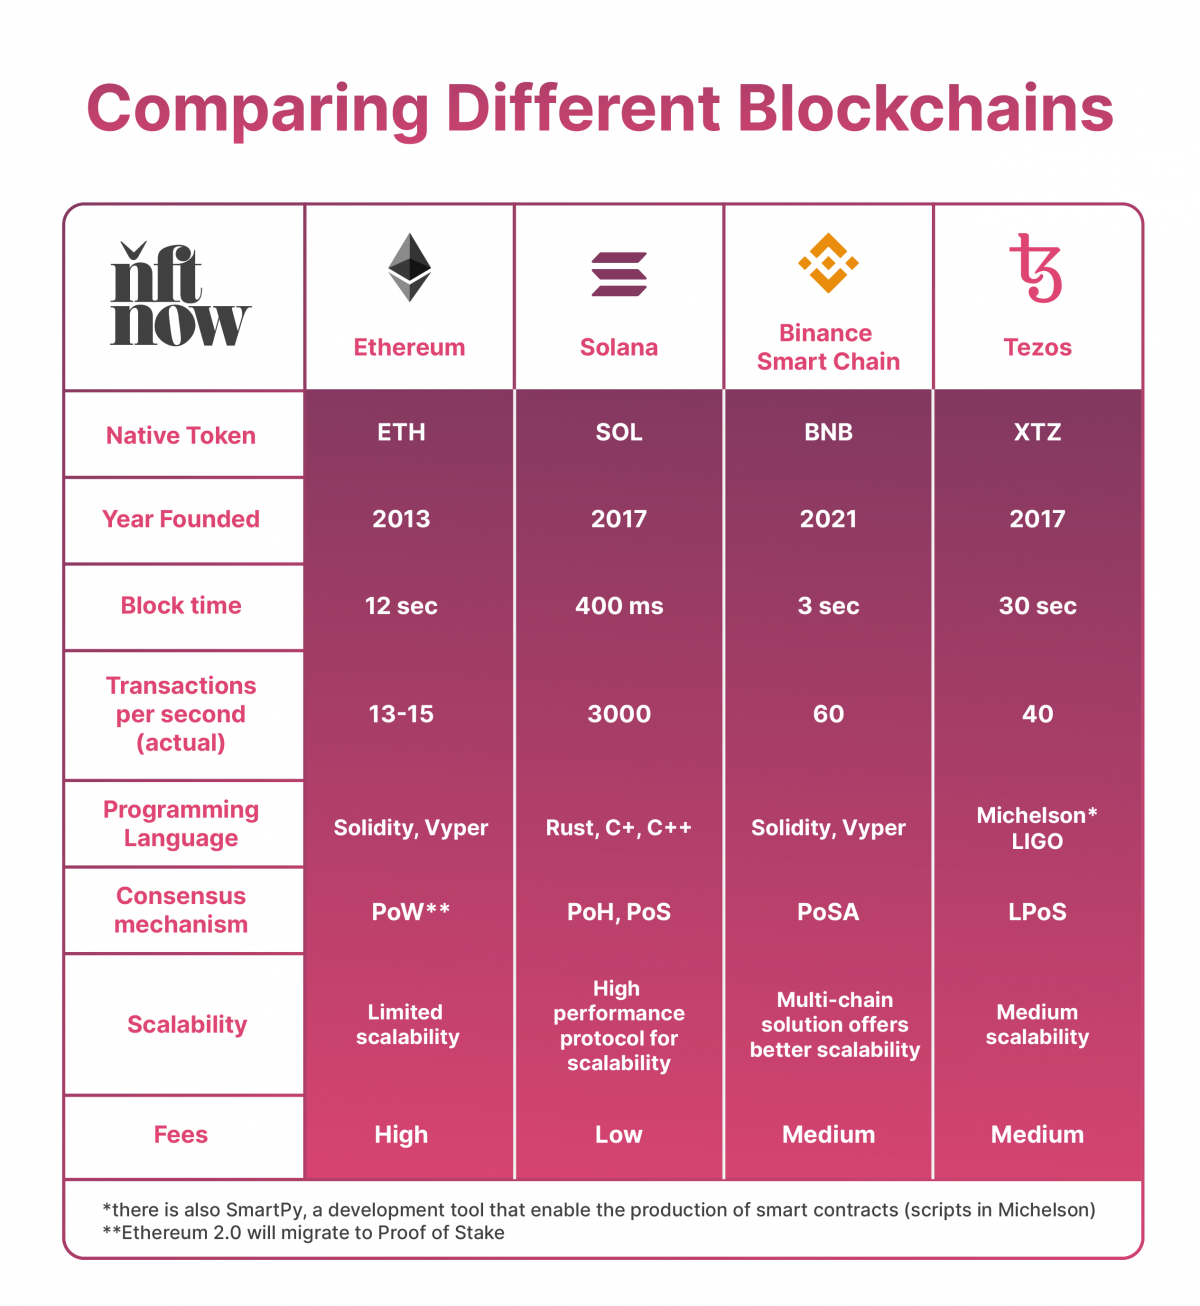 An image comparing the ethereum, tezos, solana, and binance blockchain